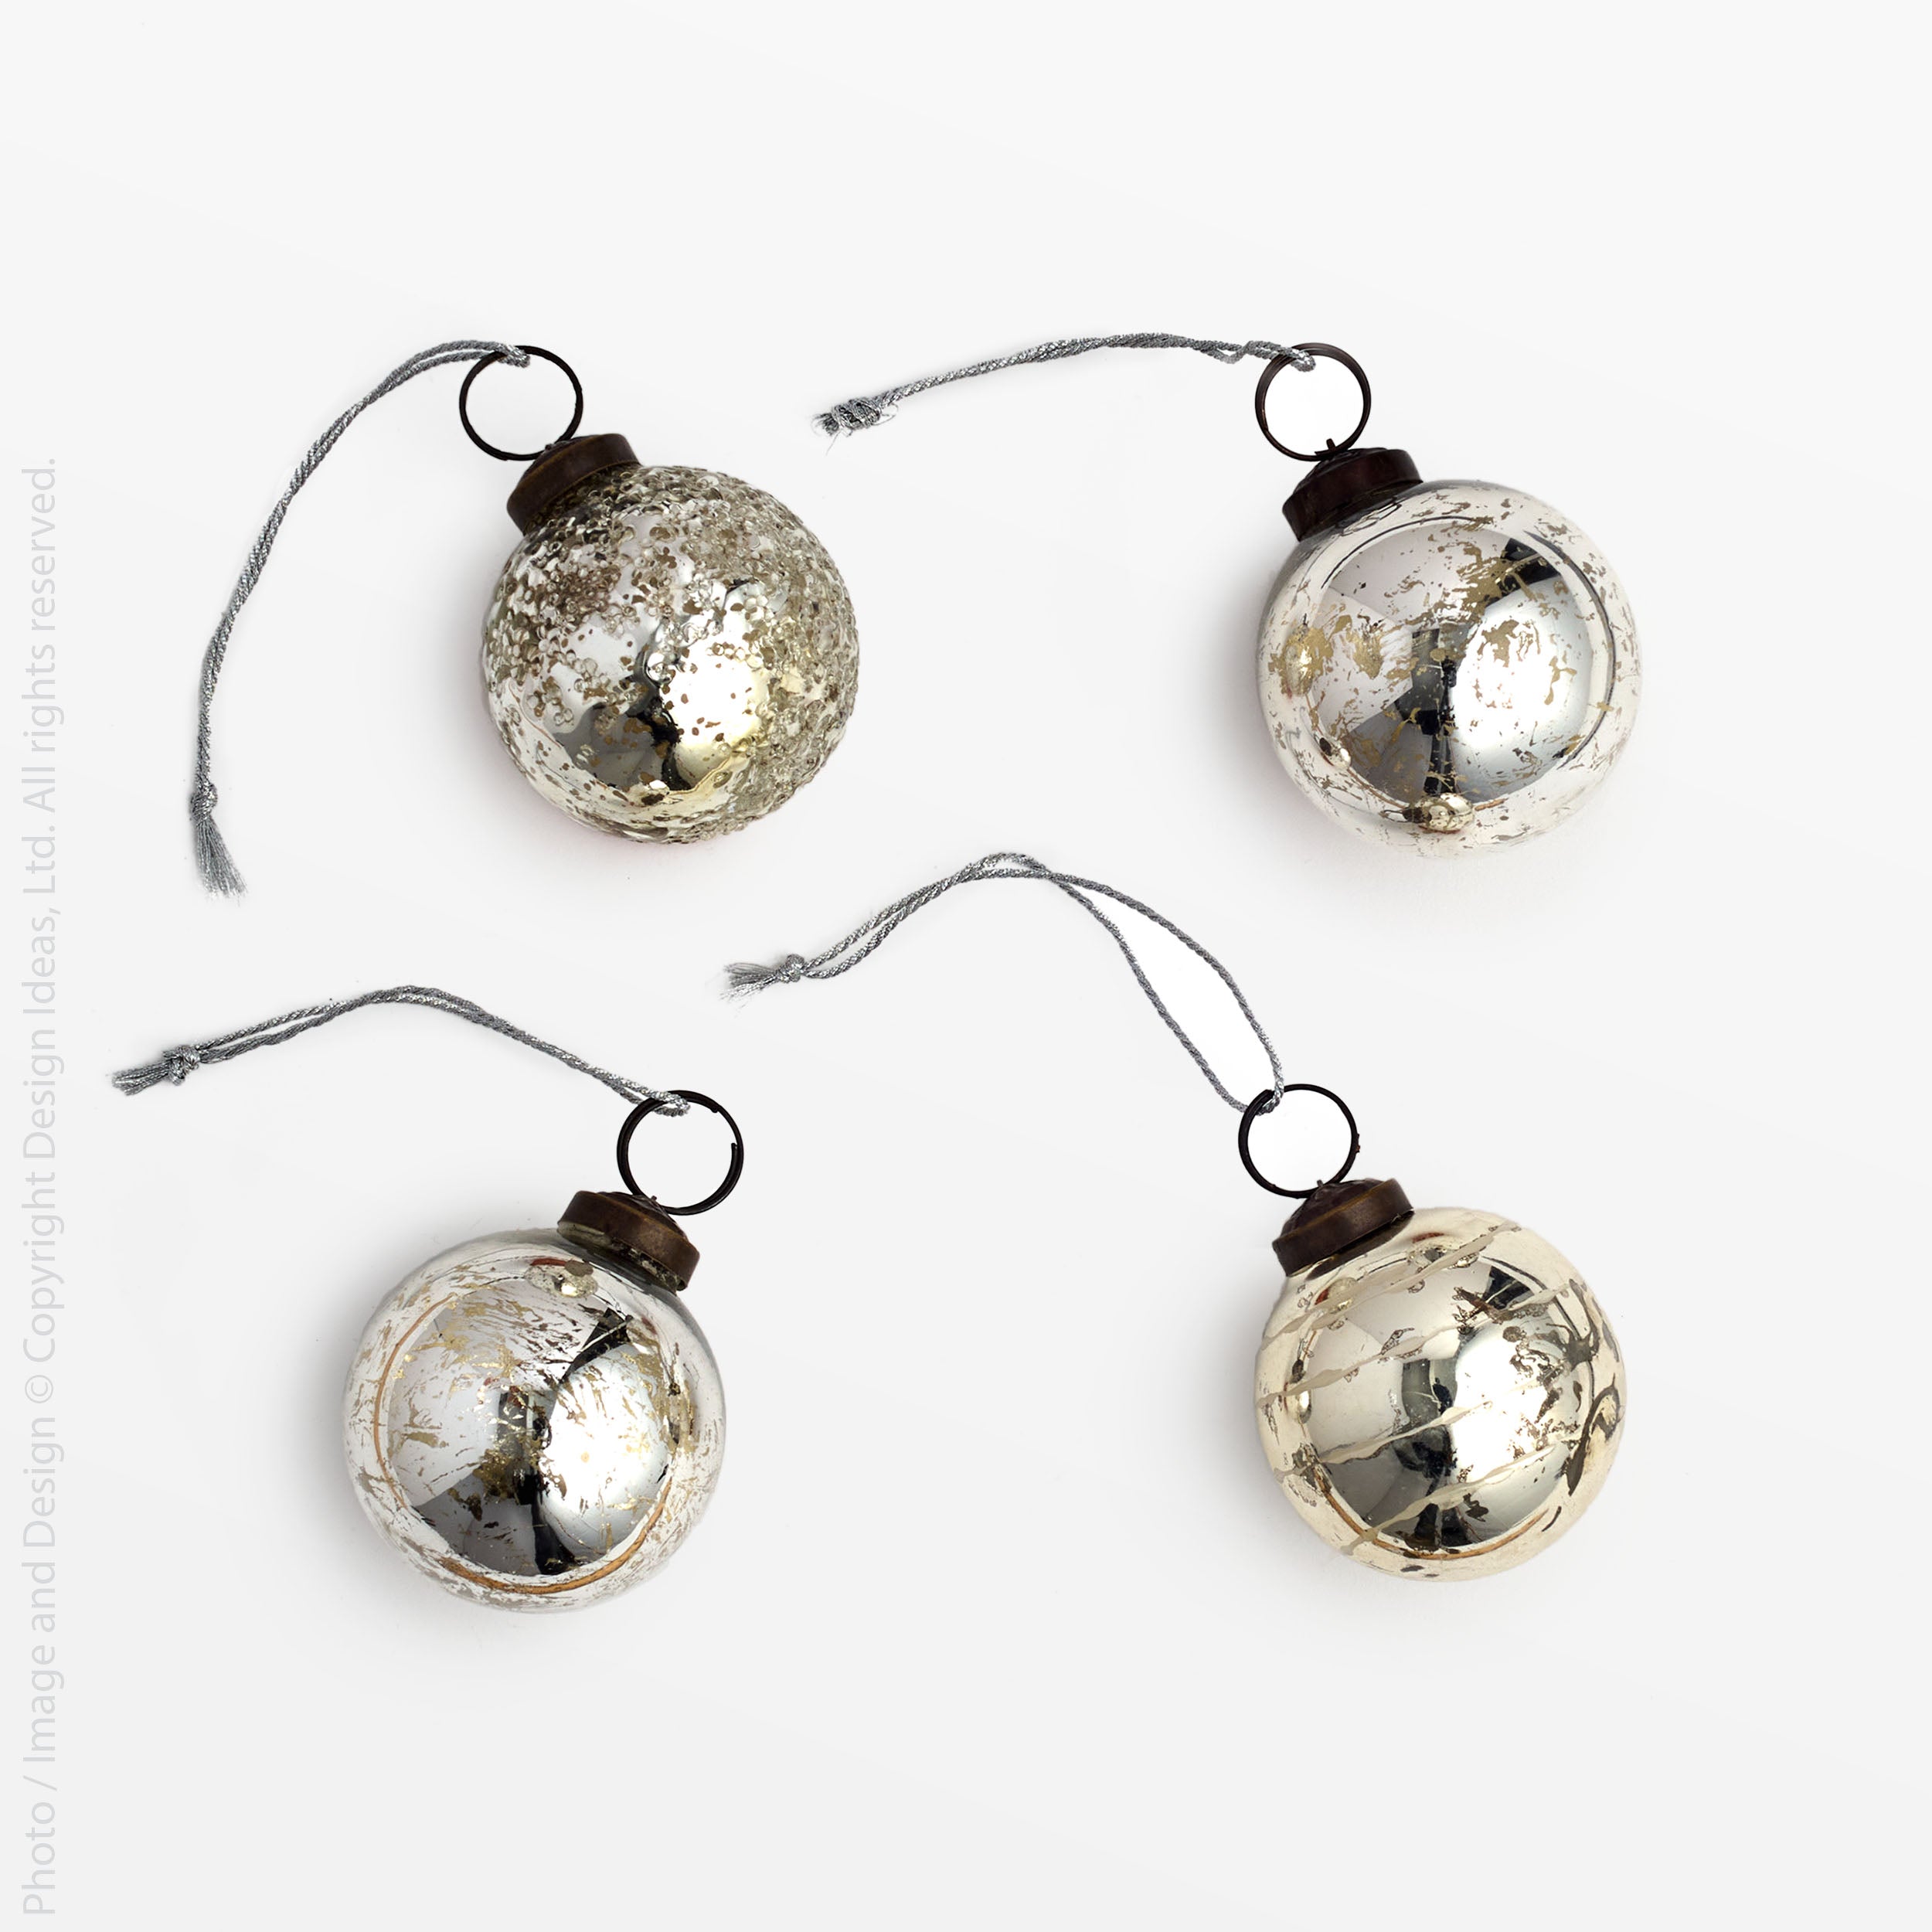 Jensen™ ornaments, 2in, set of 4 - Silver | Image 1 | Premium Ornaments from the Jensen collection | made with Glass for long lasting use | texxture